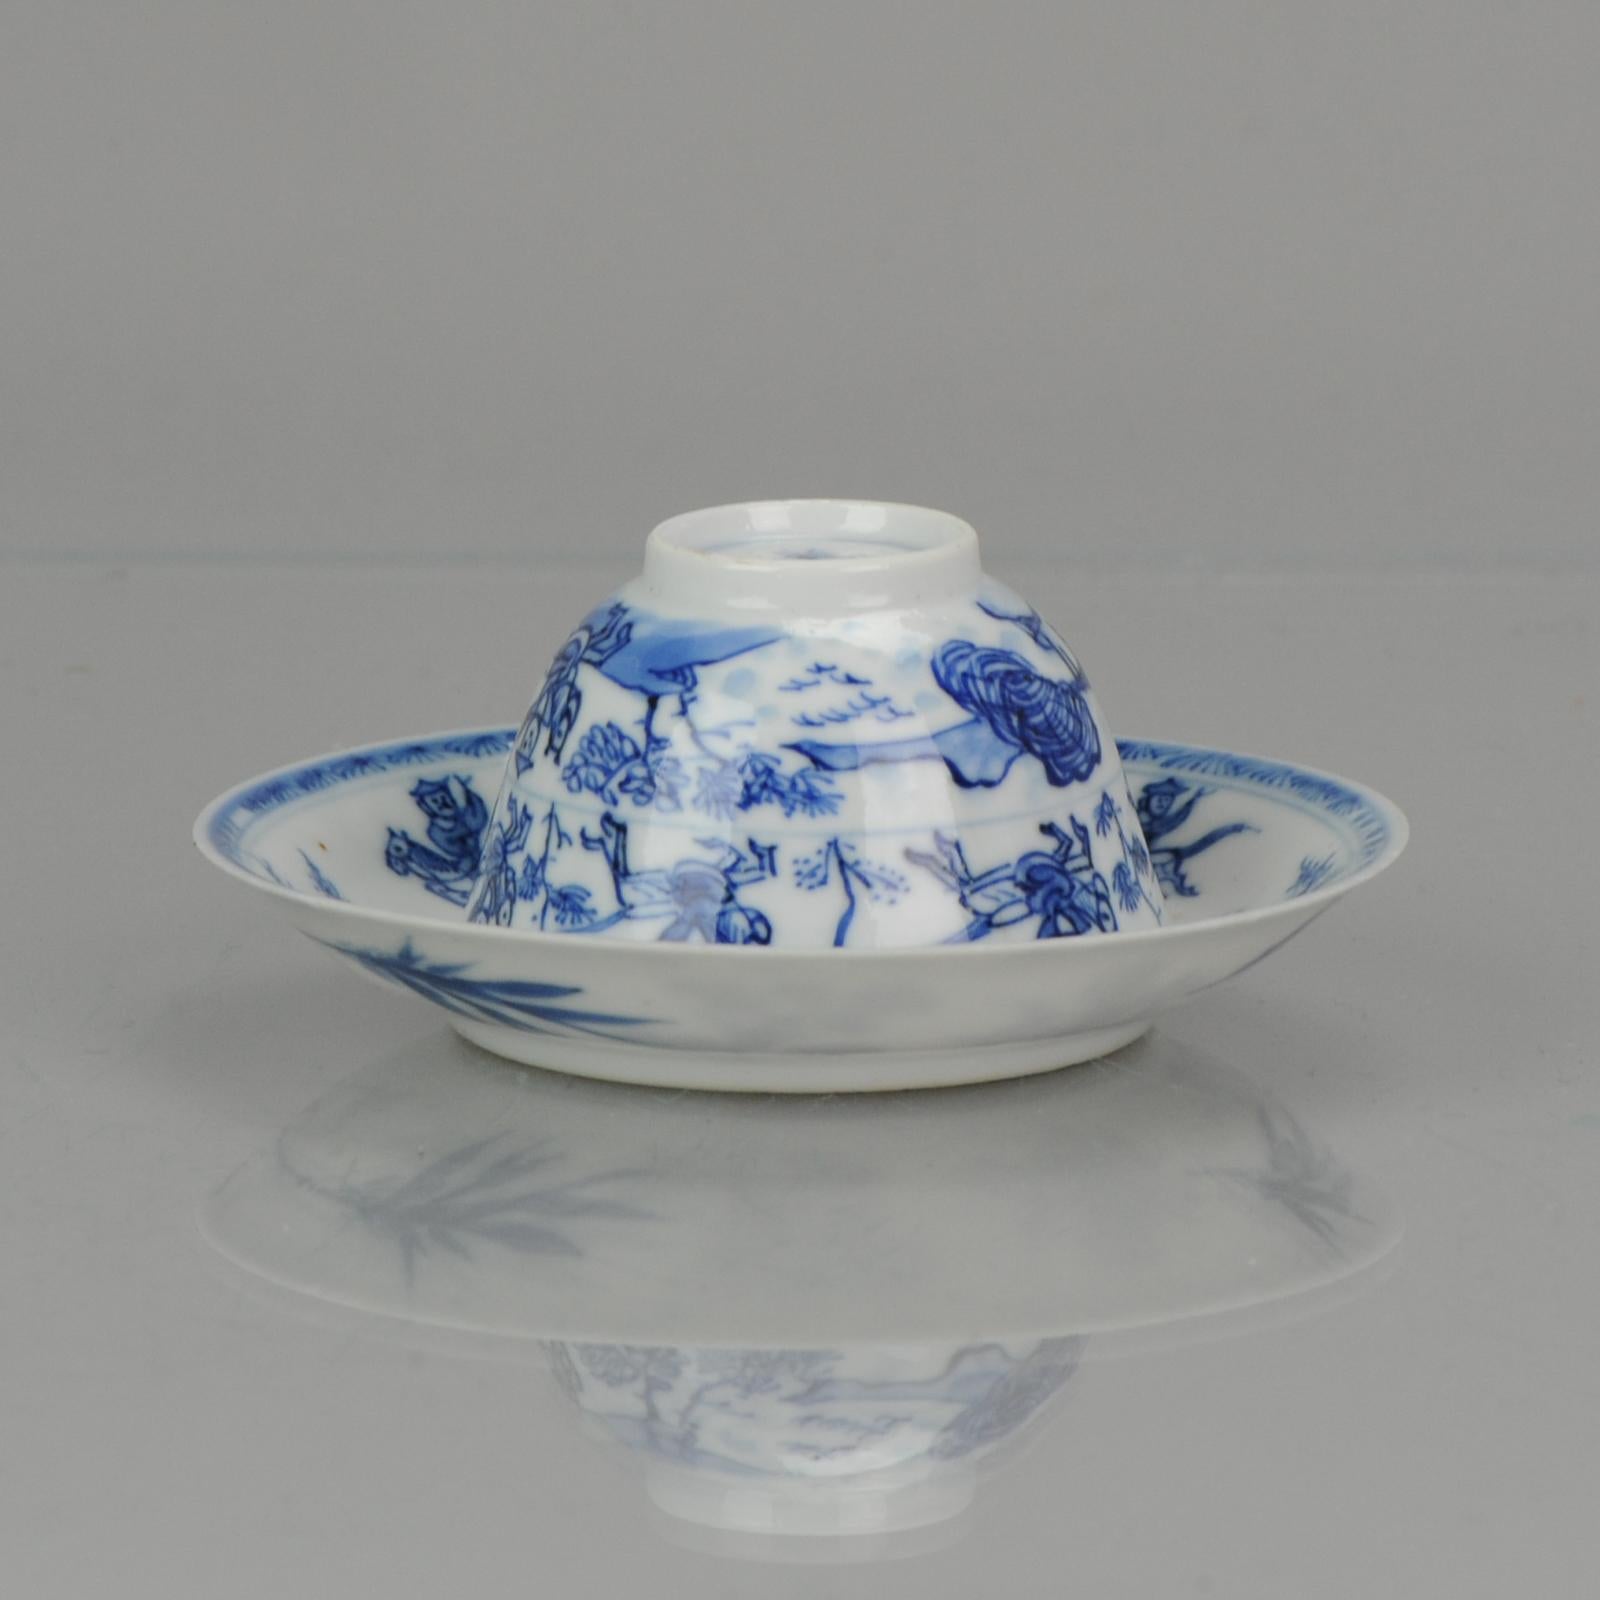 Lovely thinly potted antique Chinese porcelain saucer with a central decoration of a person on horseback next to a tree with a bird in it, executed in a charming underglaze blue. In the border a decoration of patterns identical to those in the